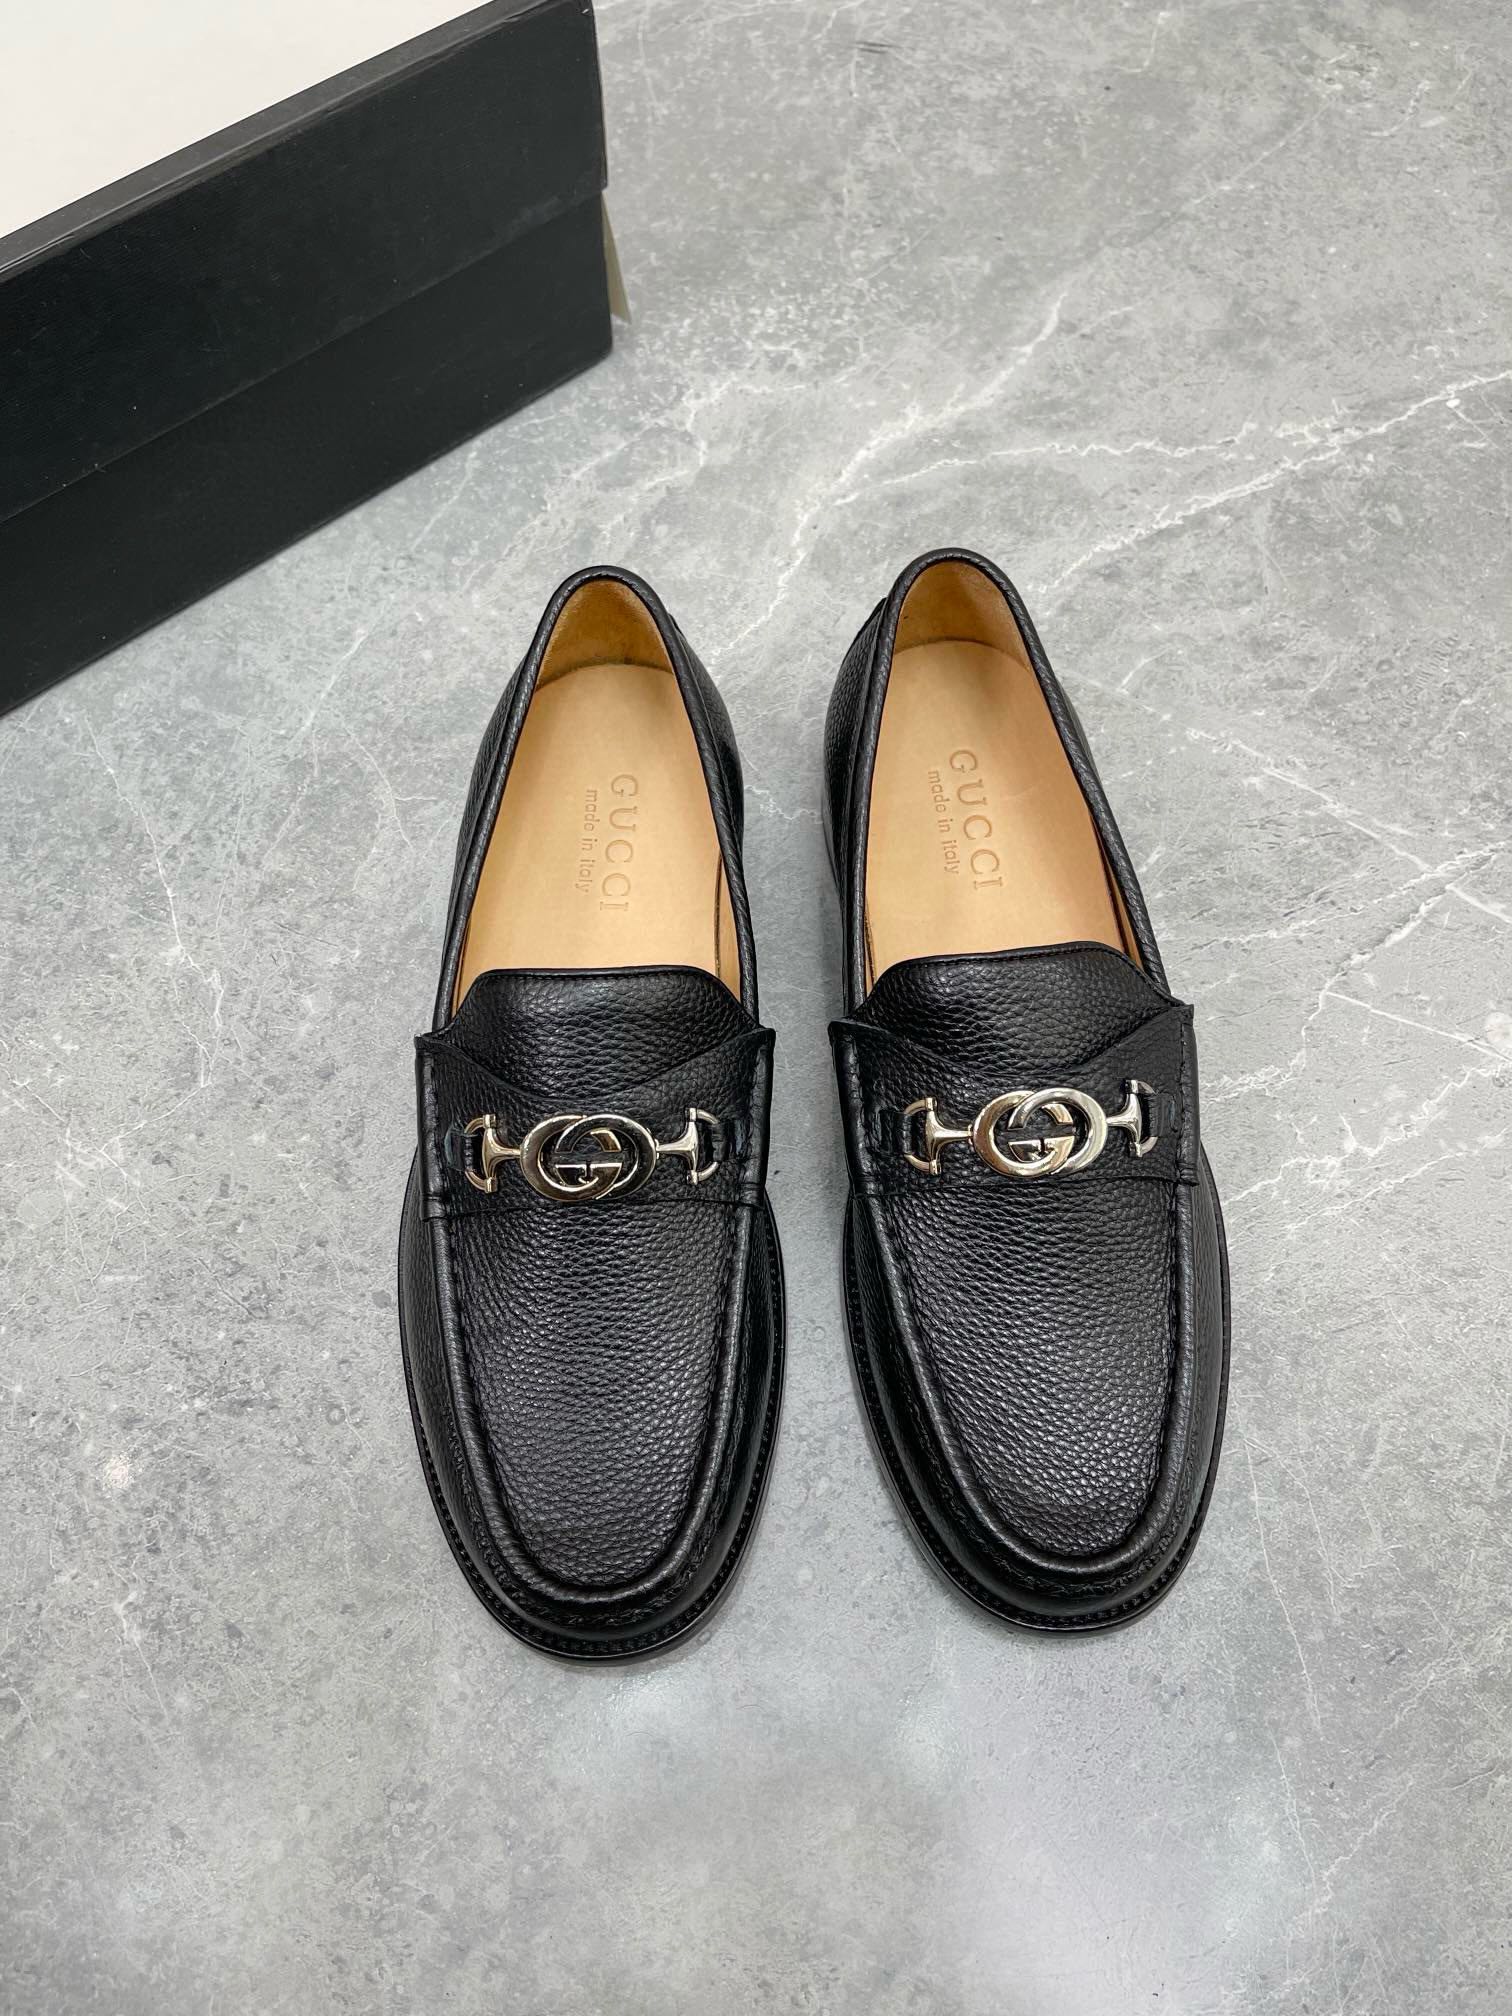 Same as Original
 Gucci Replica
 Shoes Loafers Men Cowhide Genuine Leather Casual